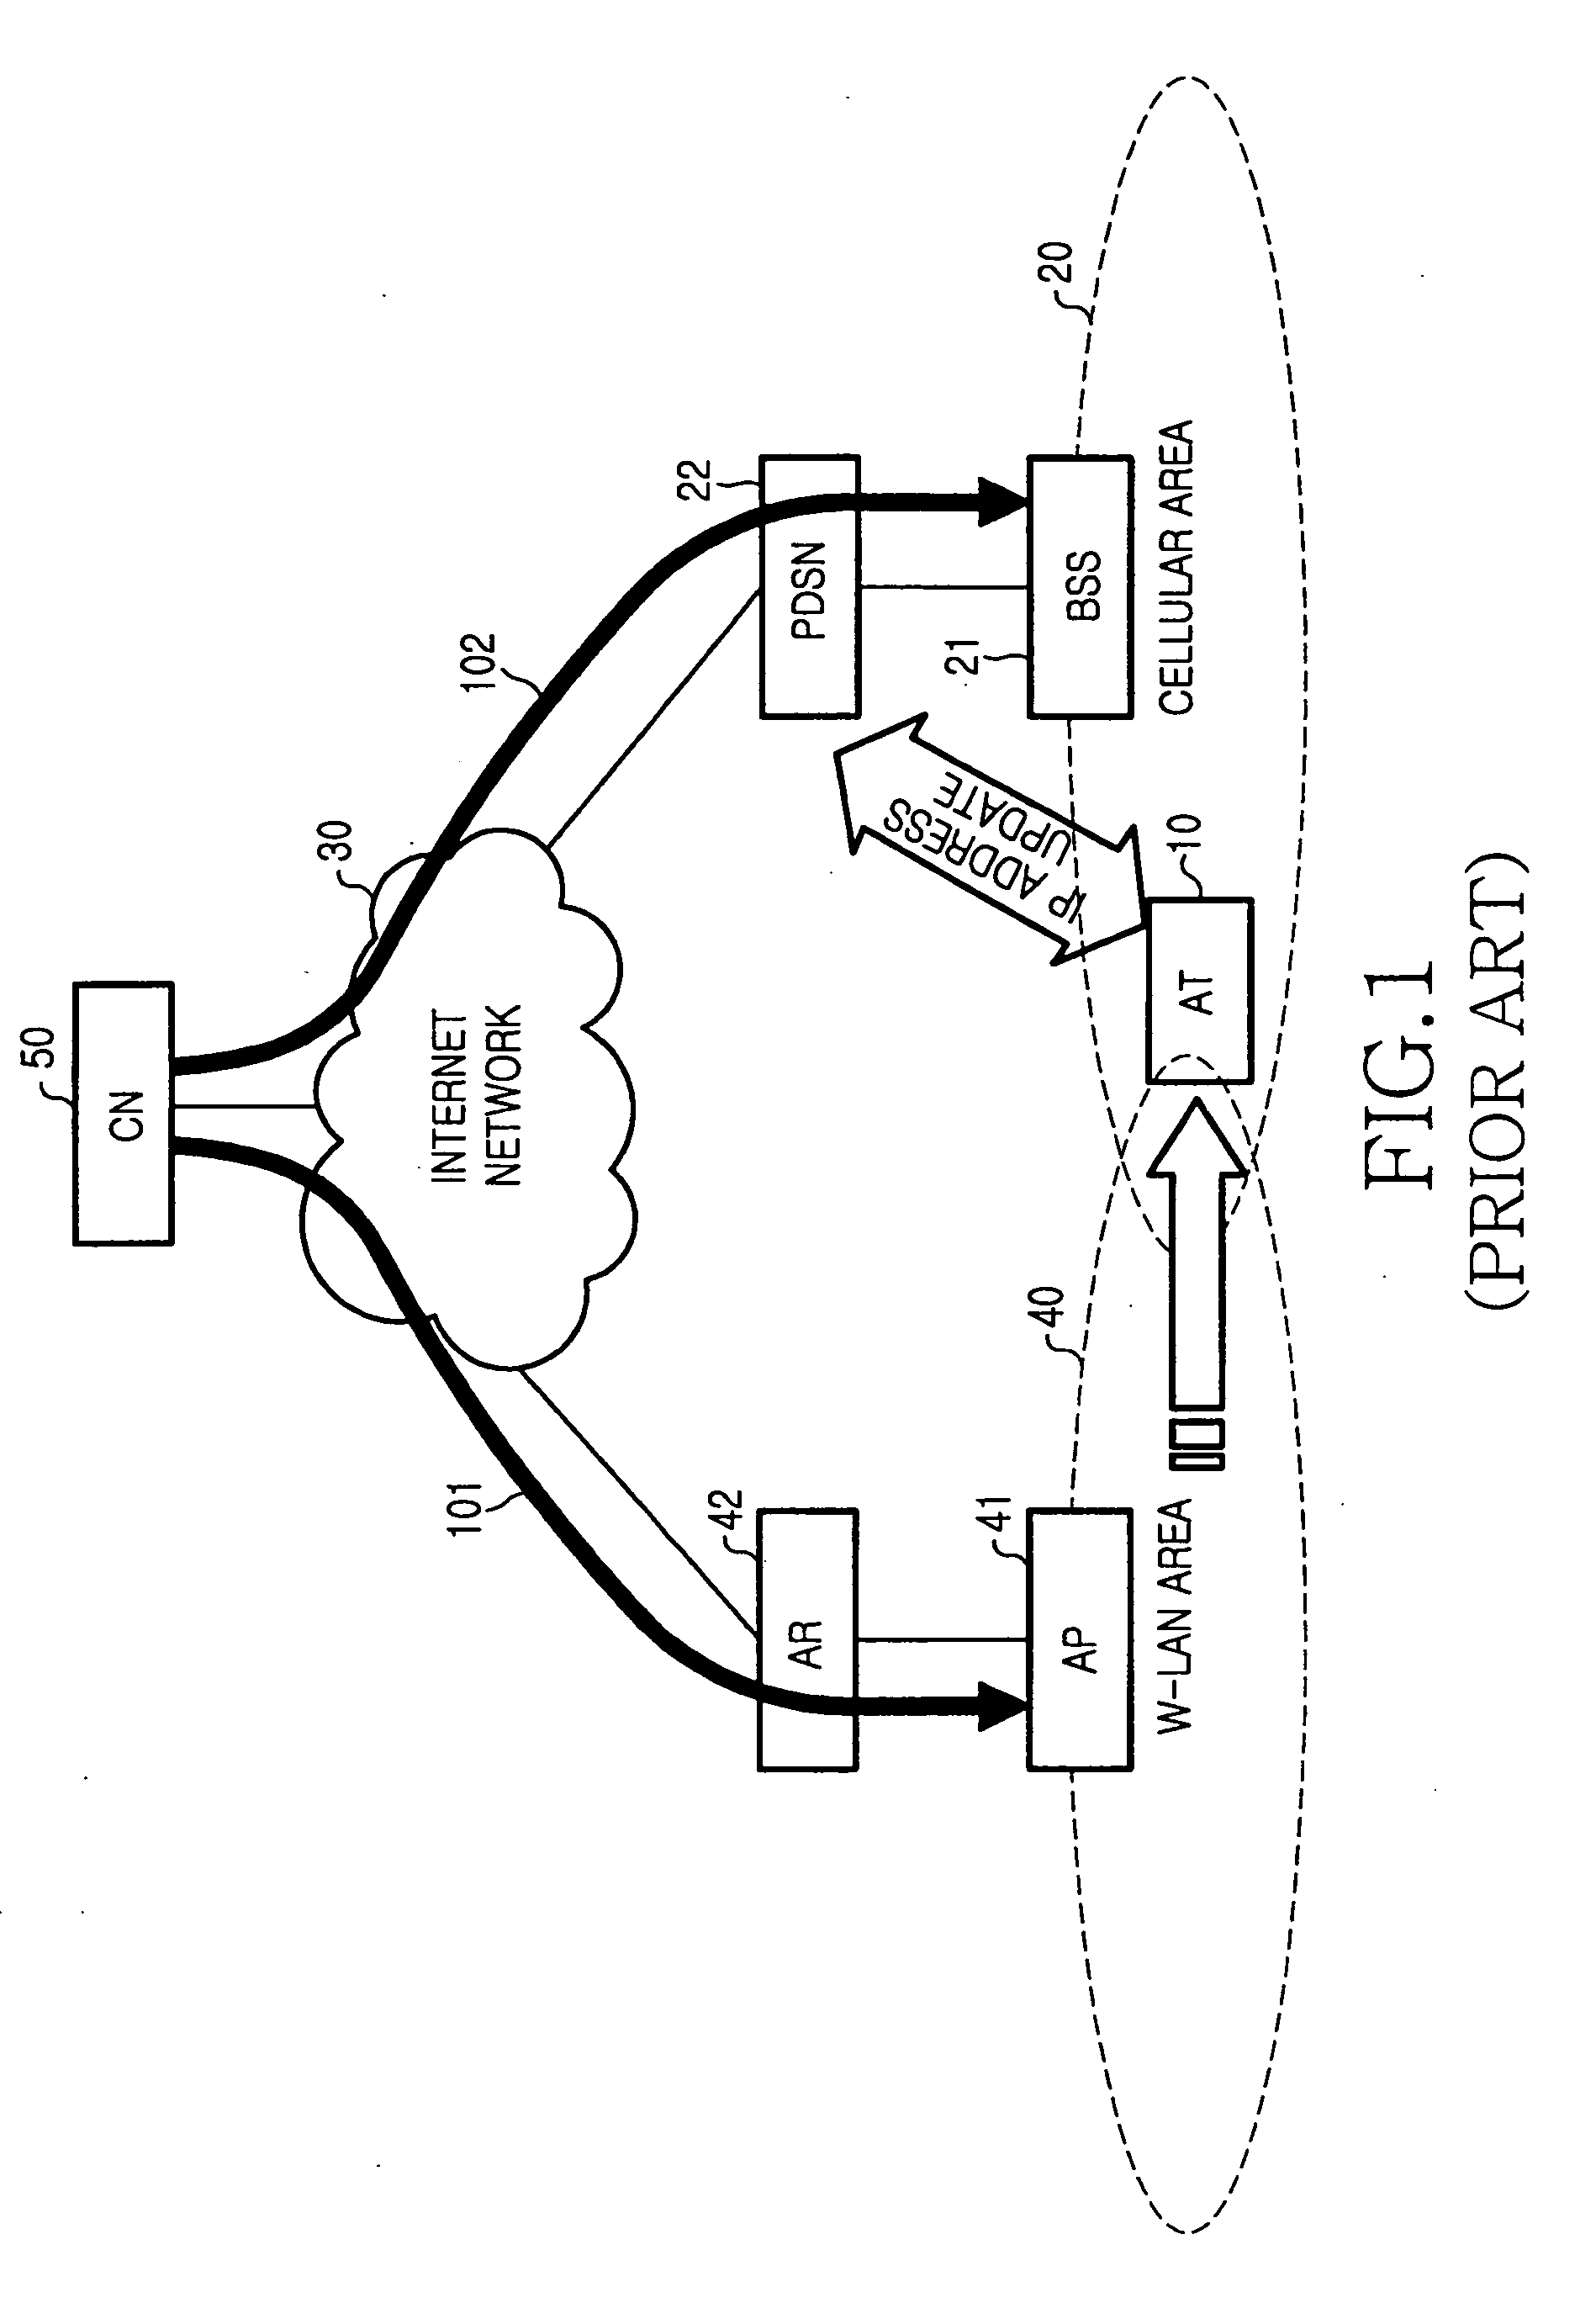 Handoff system and method between a wireless LAN and mobile communication network